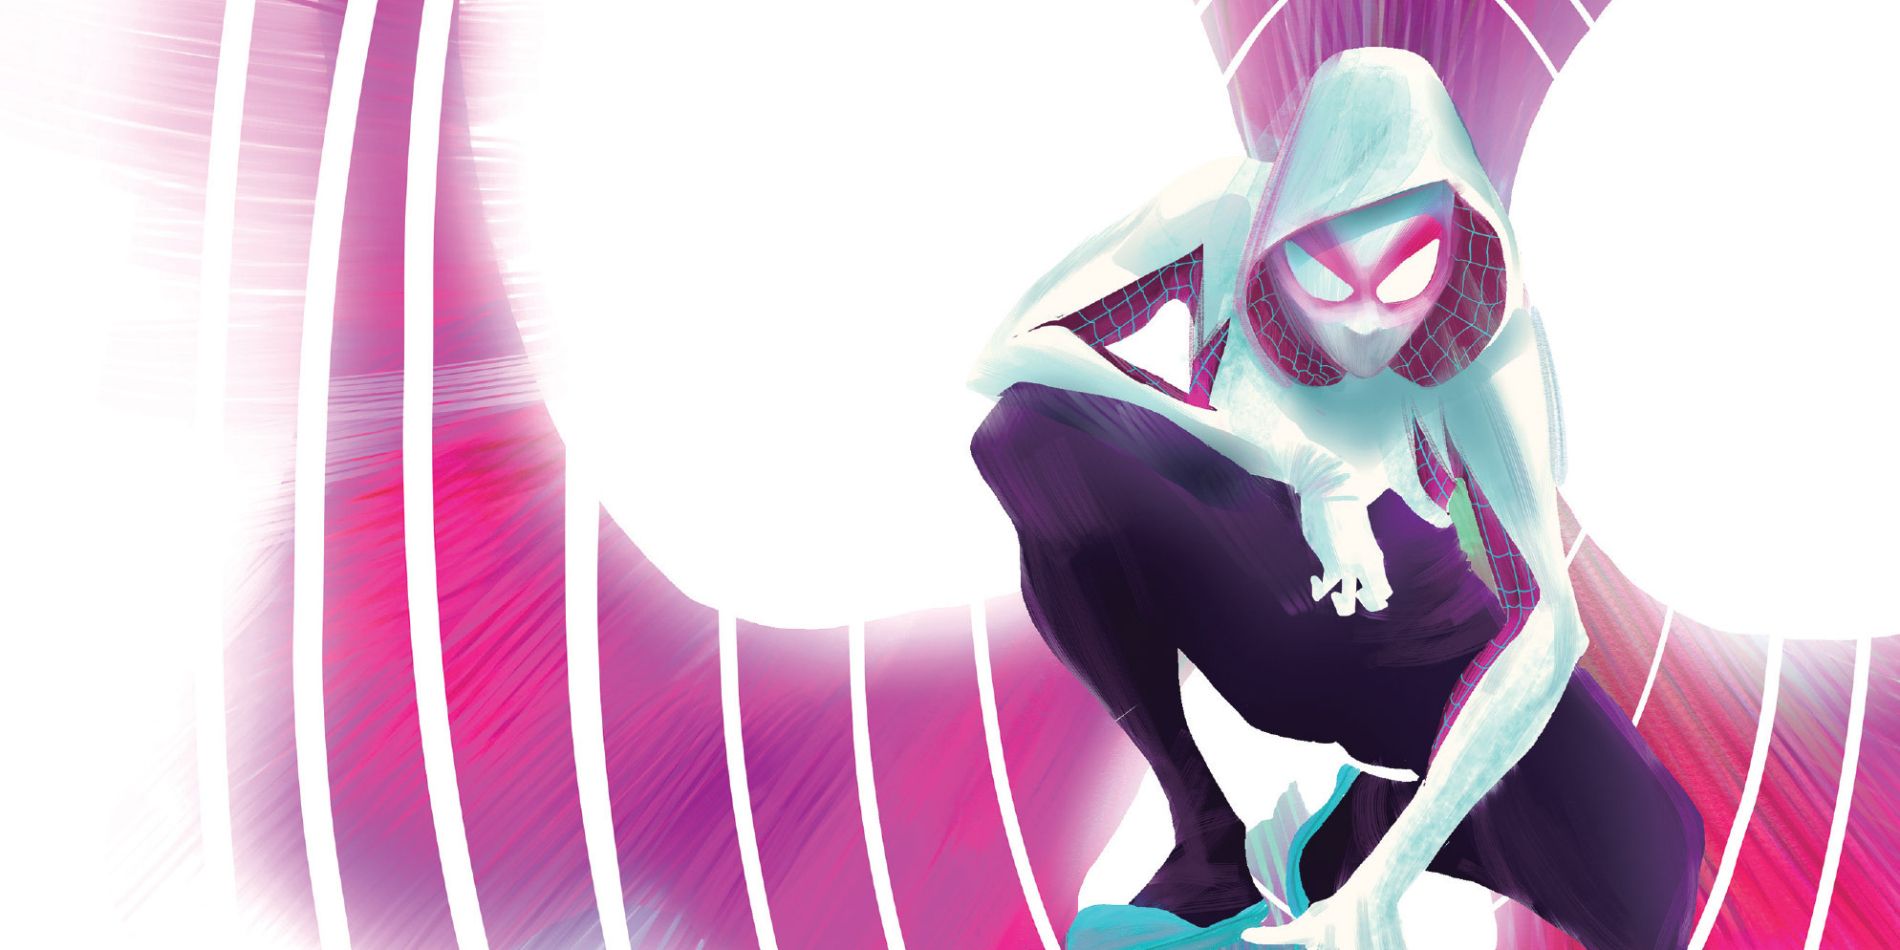 Spider-Gwen upon a perch in cover art for Spider-Gwen comics